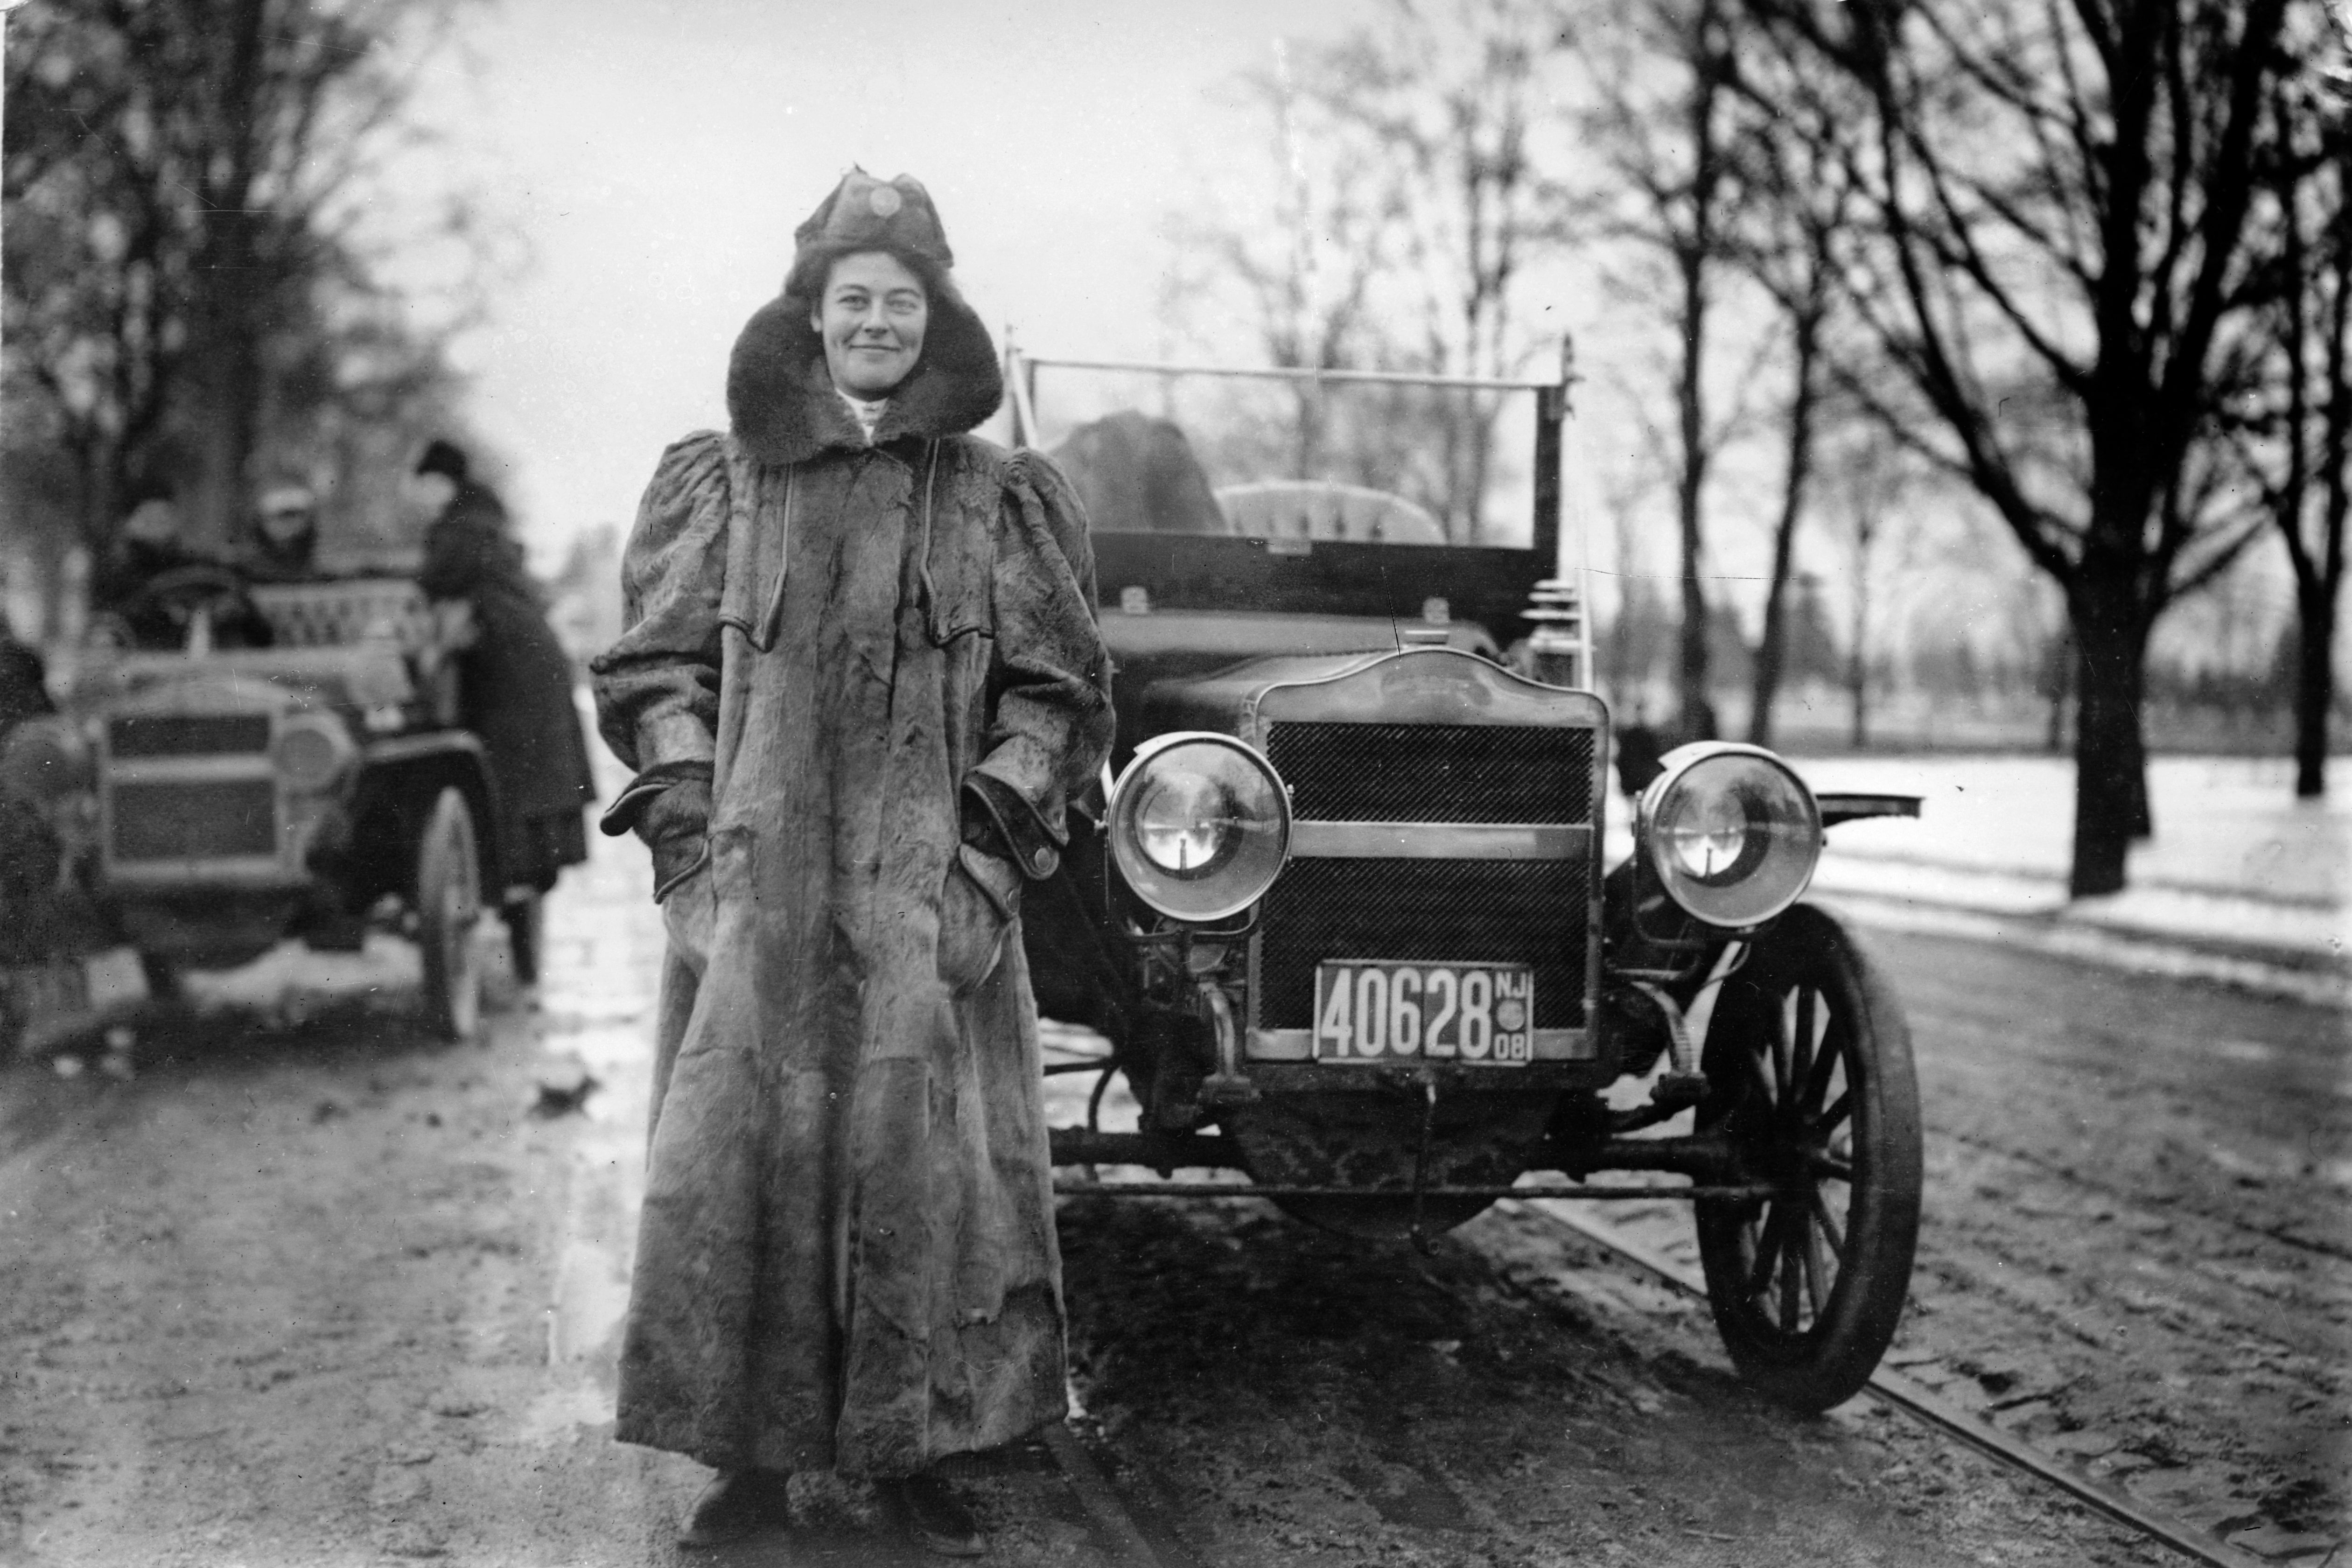 A woman in a full-length coat stands smiling in front of an old-timey car.